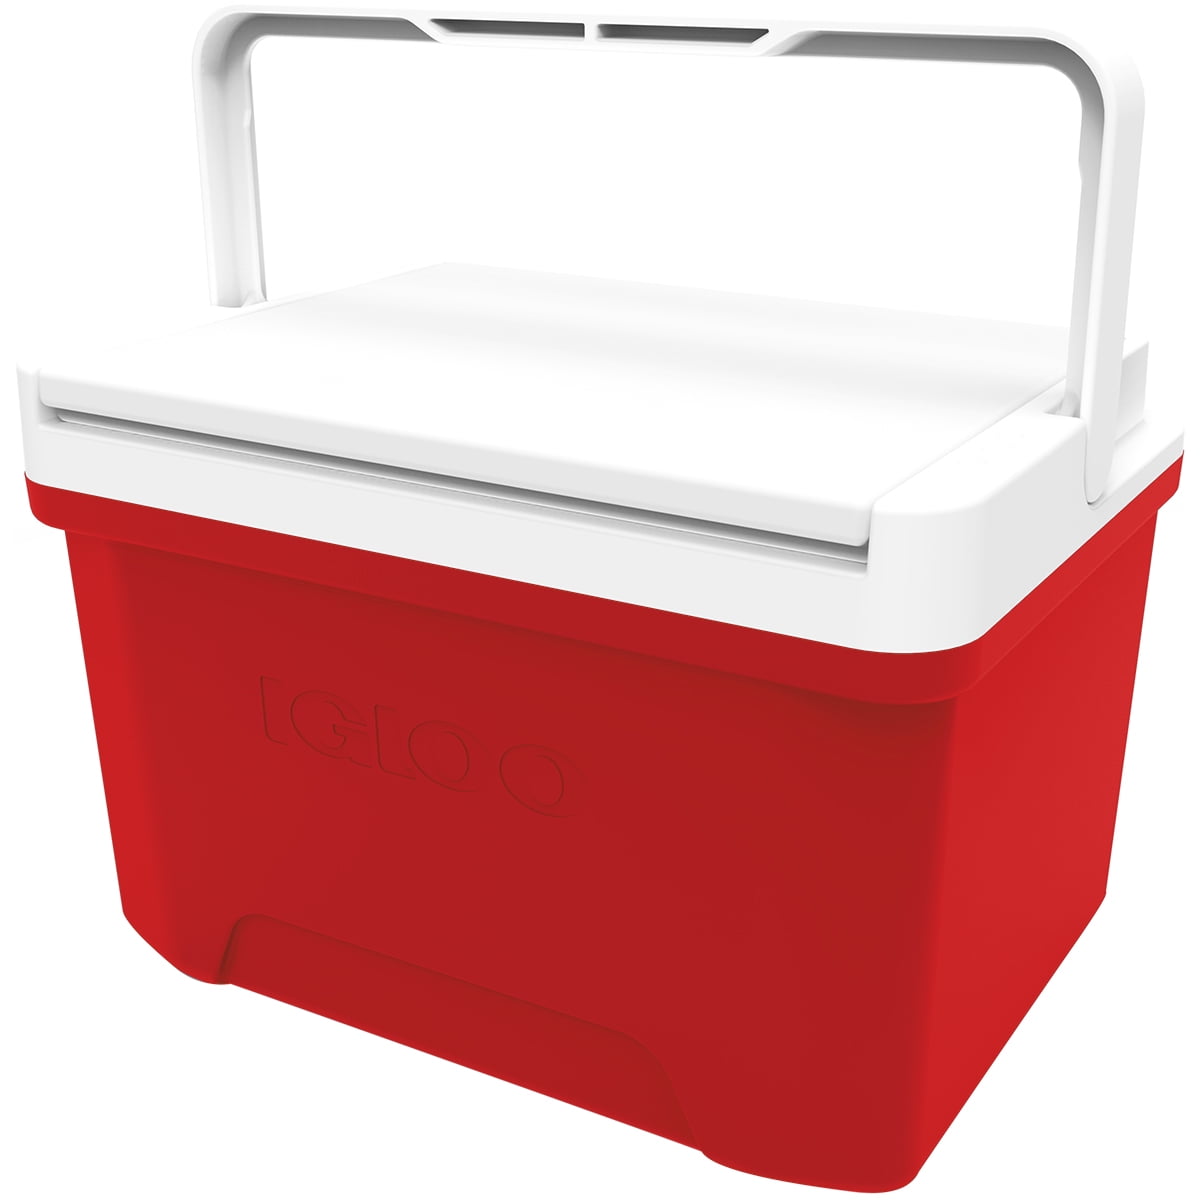 Fatboy 10QT Roto Molded Cooler Chest Ice Box Hard Lunch Box - Sand 